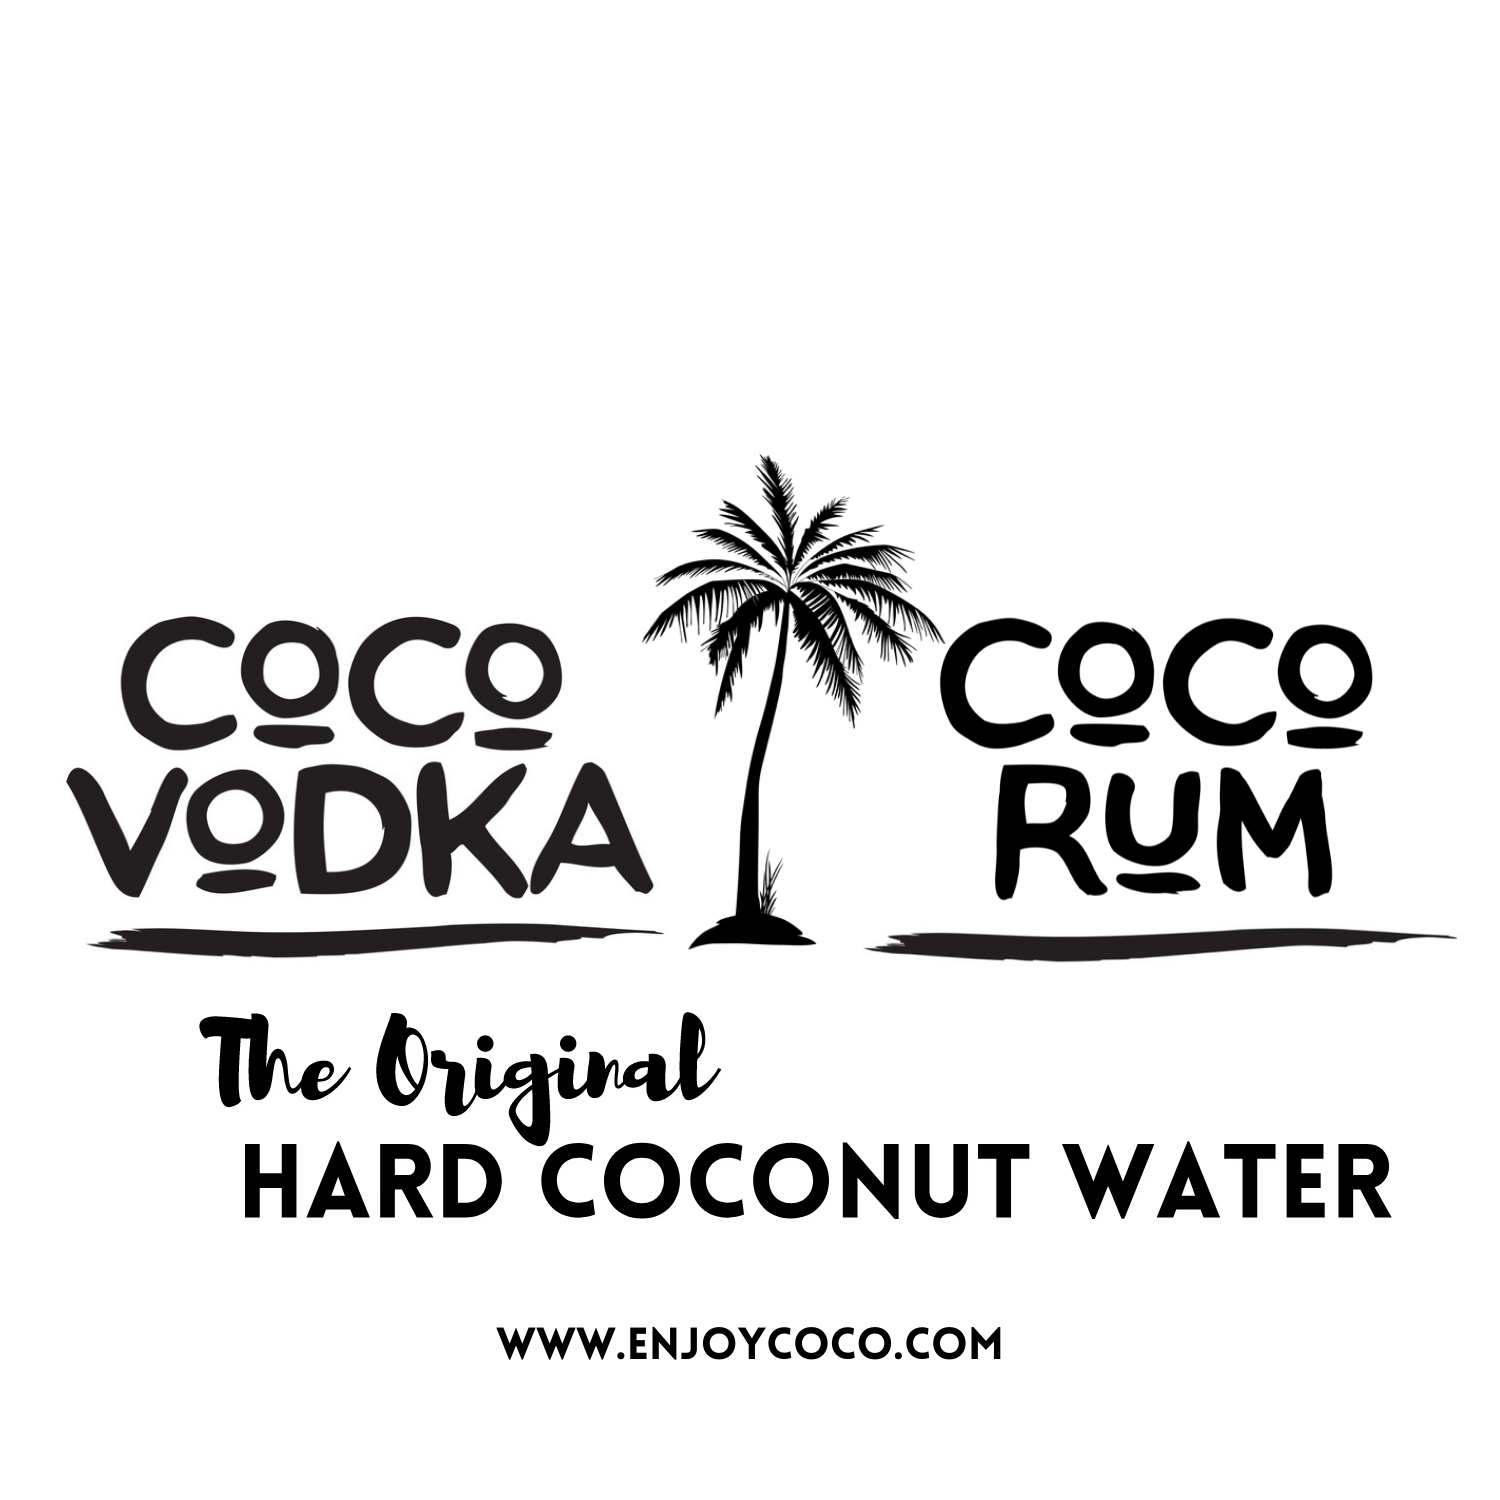 COCO VODKA AND COCO RUM LOGO TOGETHER